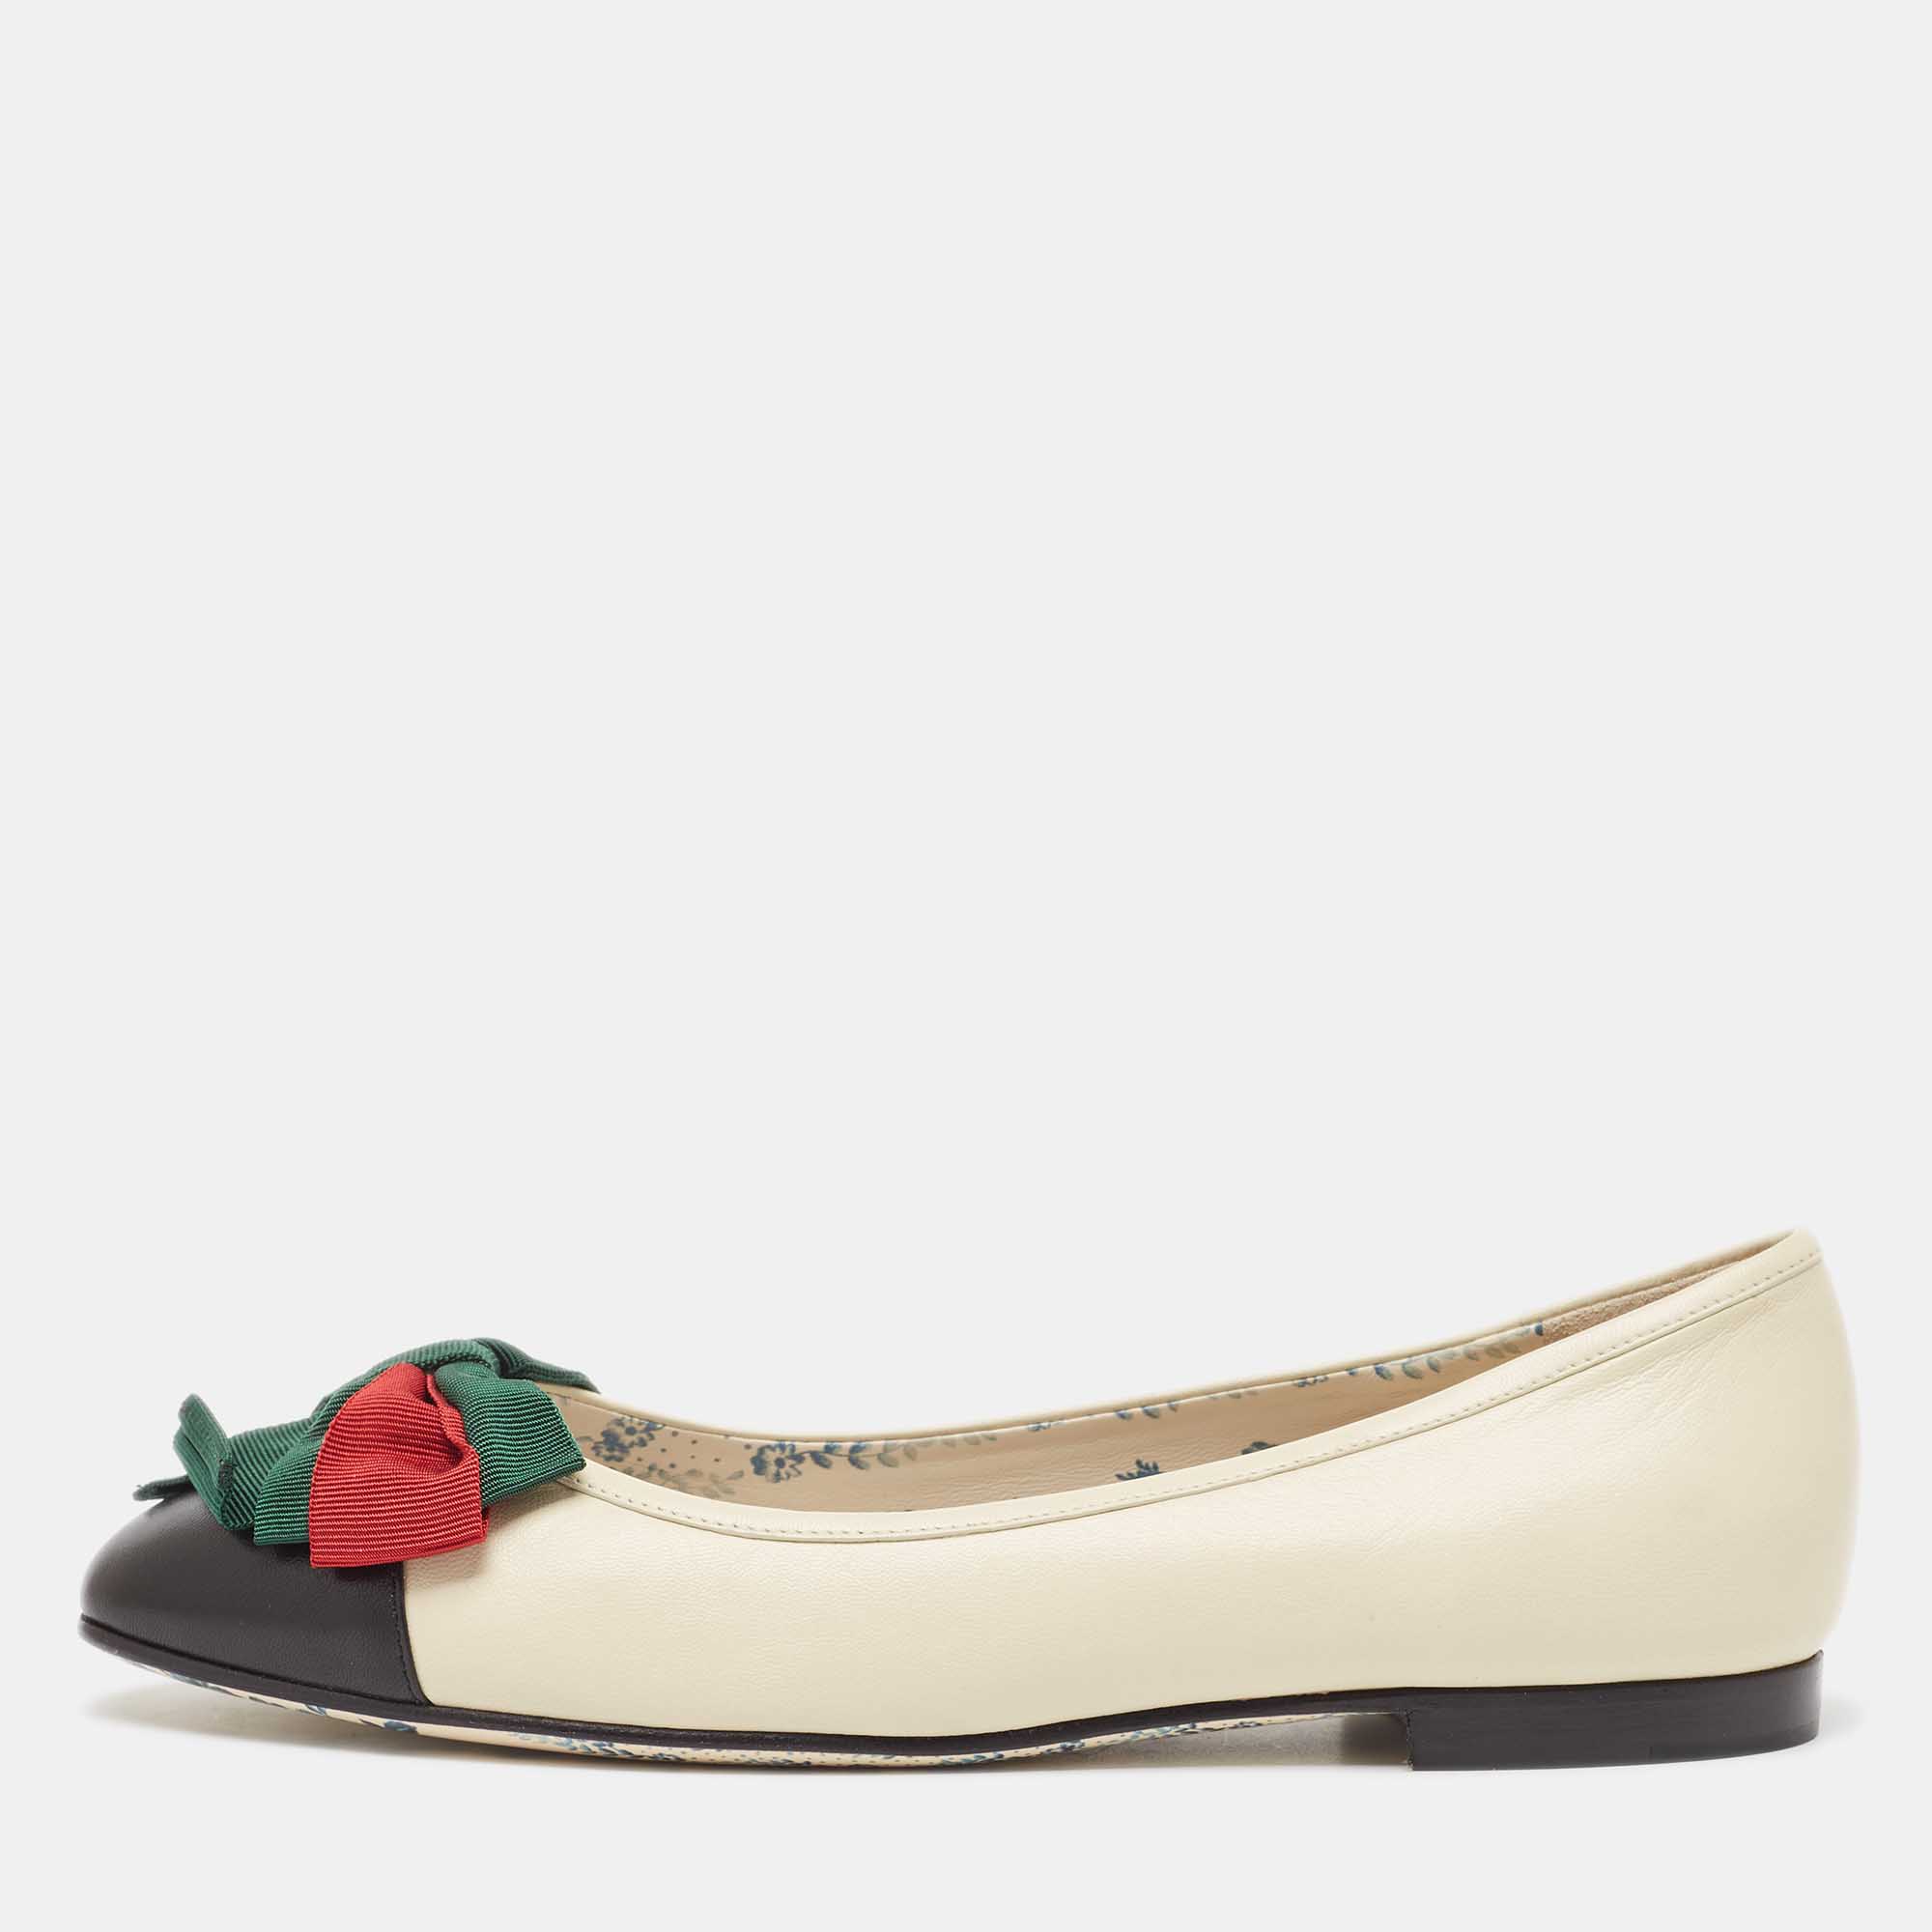 Pre-owned Gucci Off White Leather Web Bow Cap Toe Ballet Flats Size 37.5